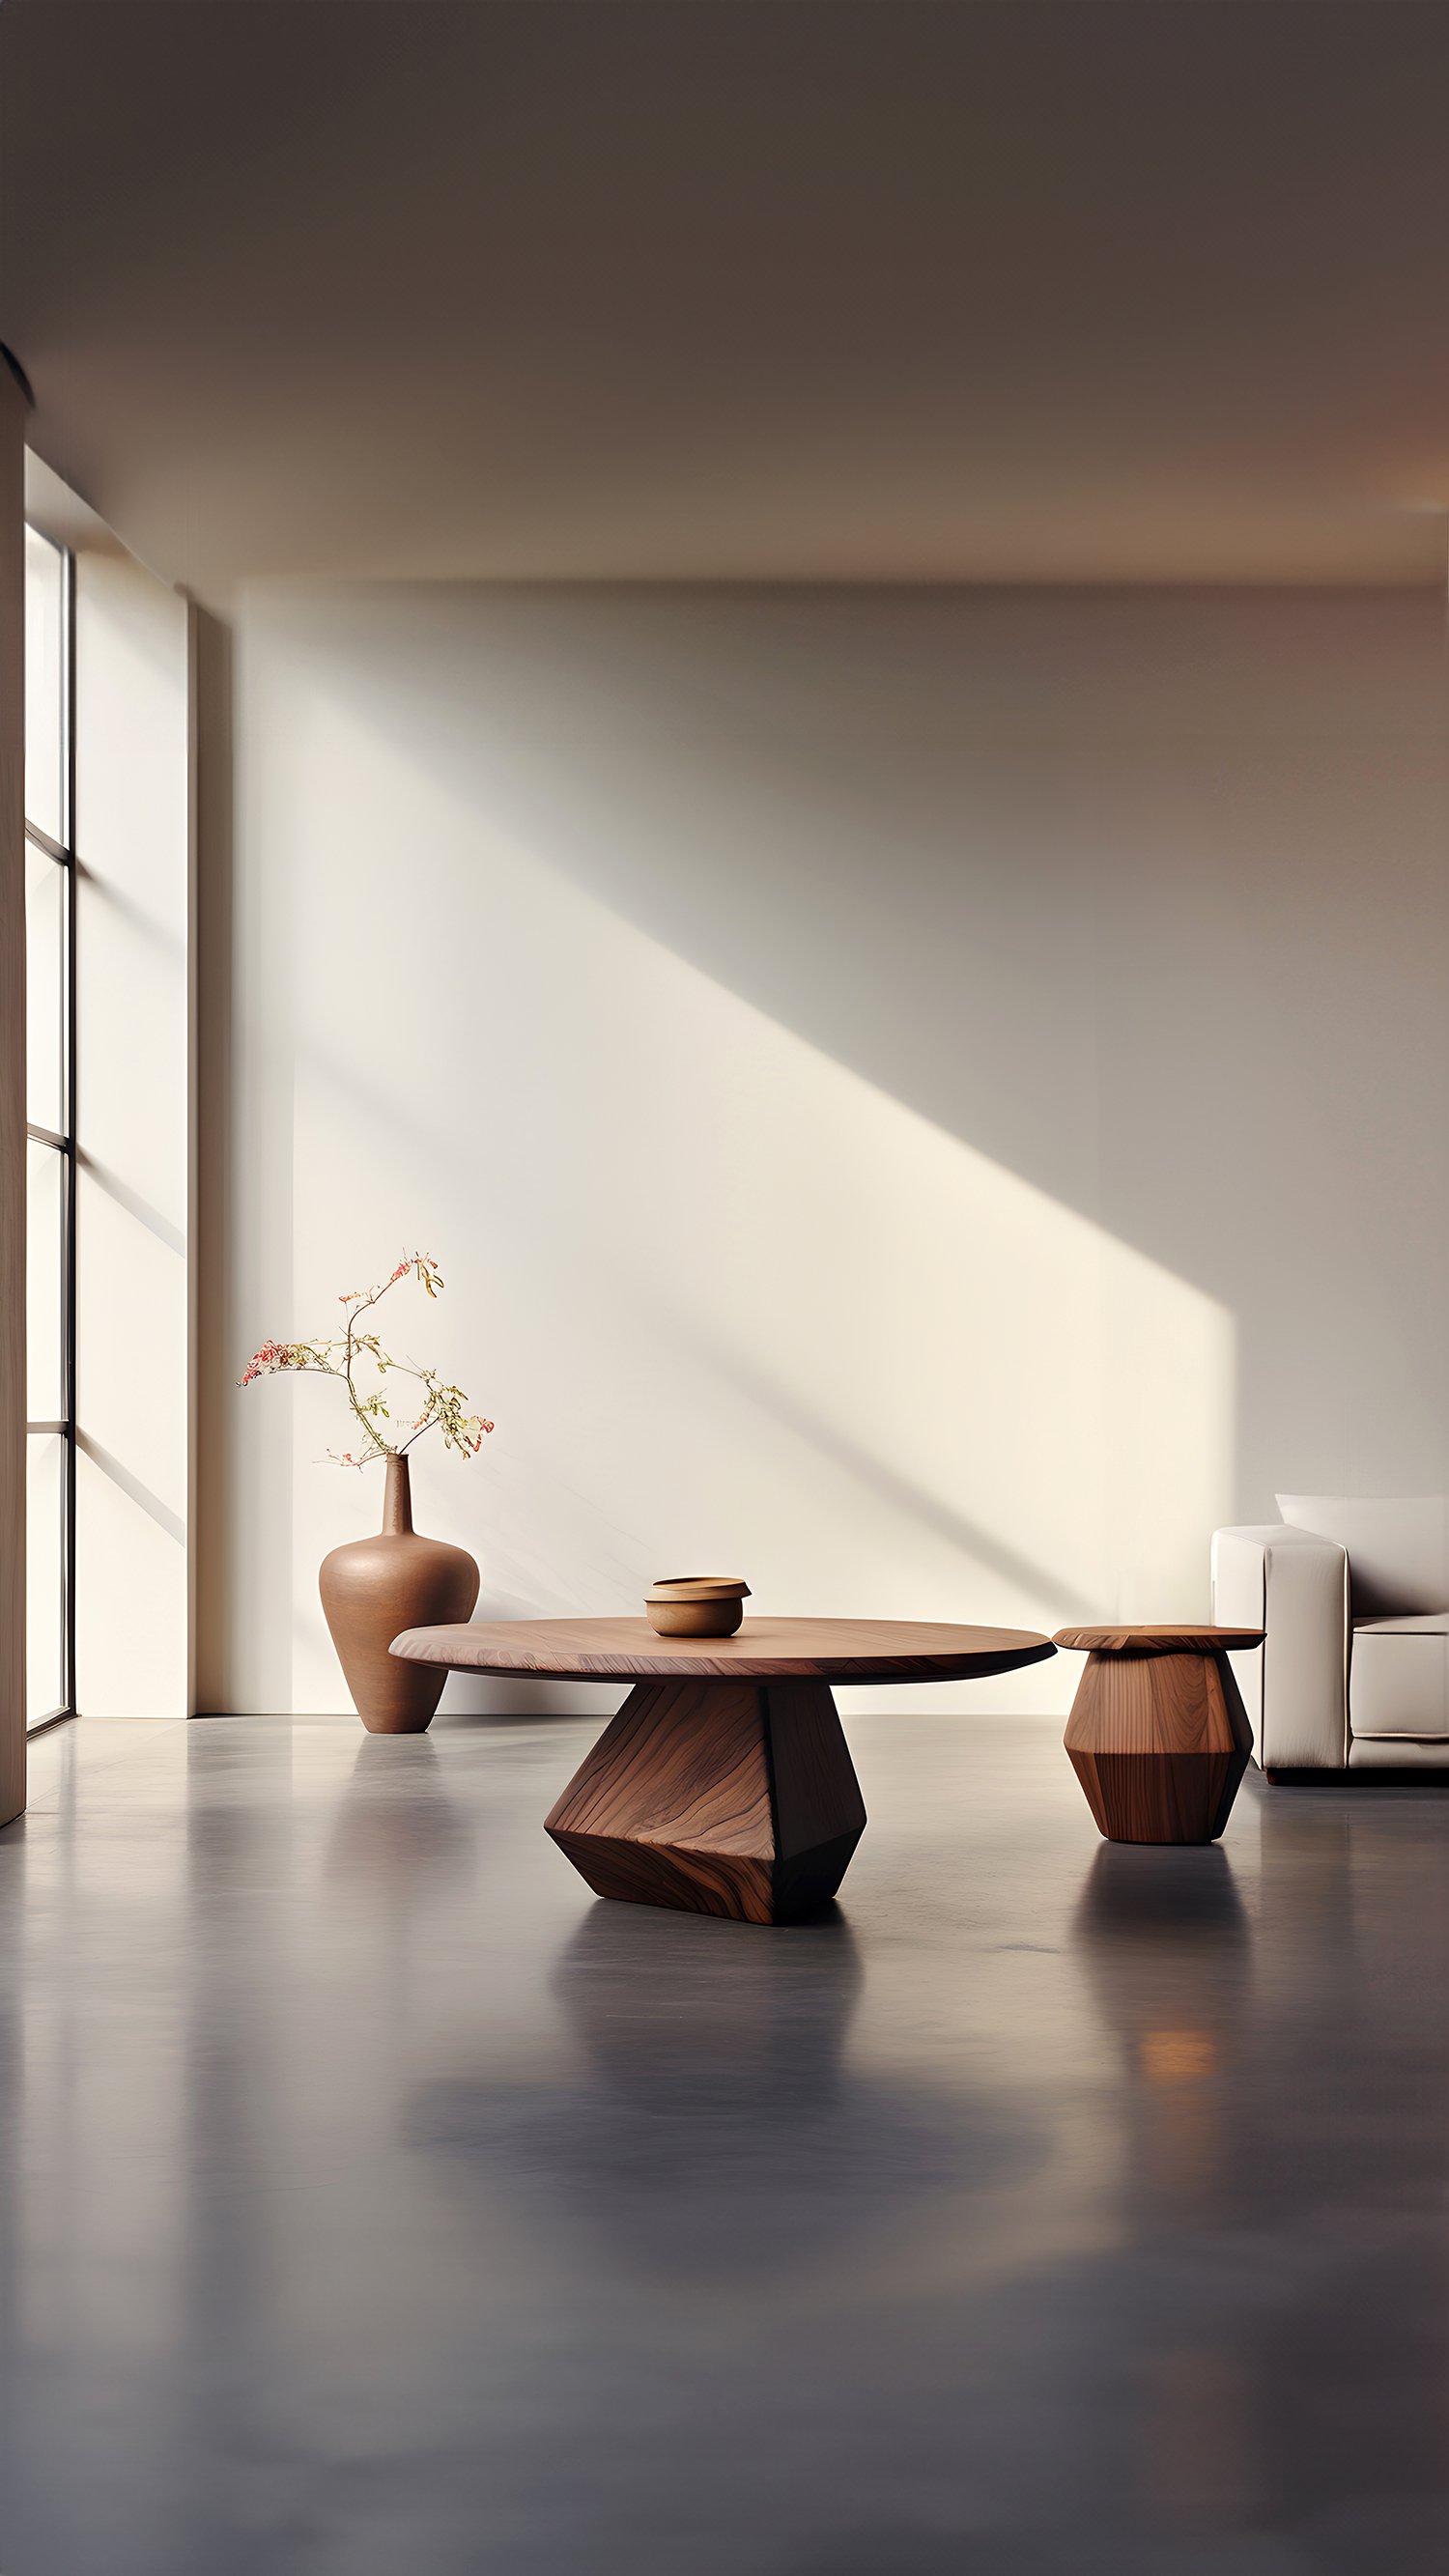 Sculptural Coffee Table Made of Solid Wood, Center Table Solace S29 by Joel Escalona — 9.jpg